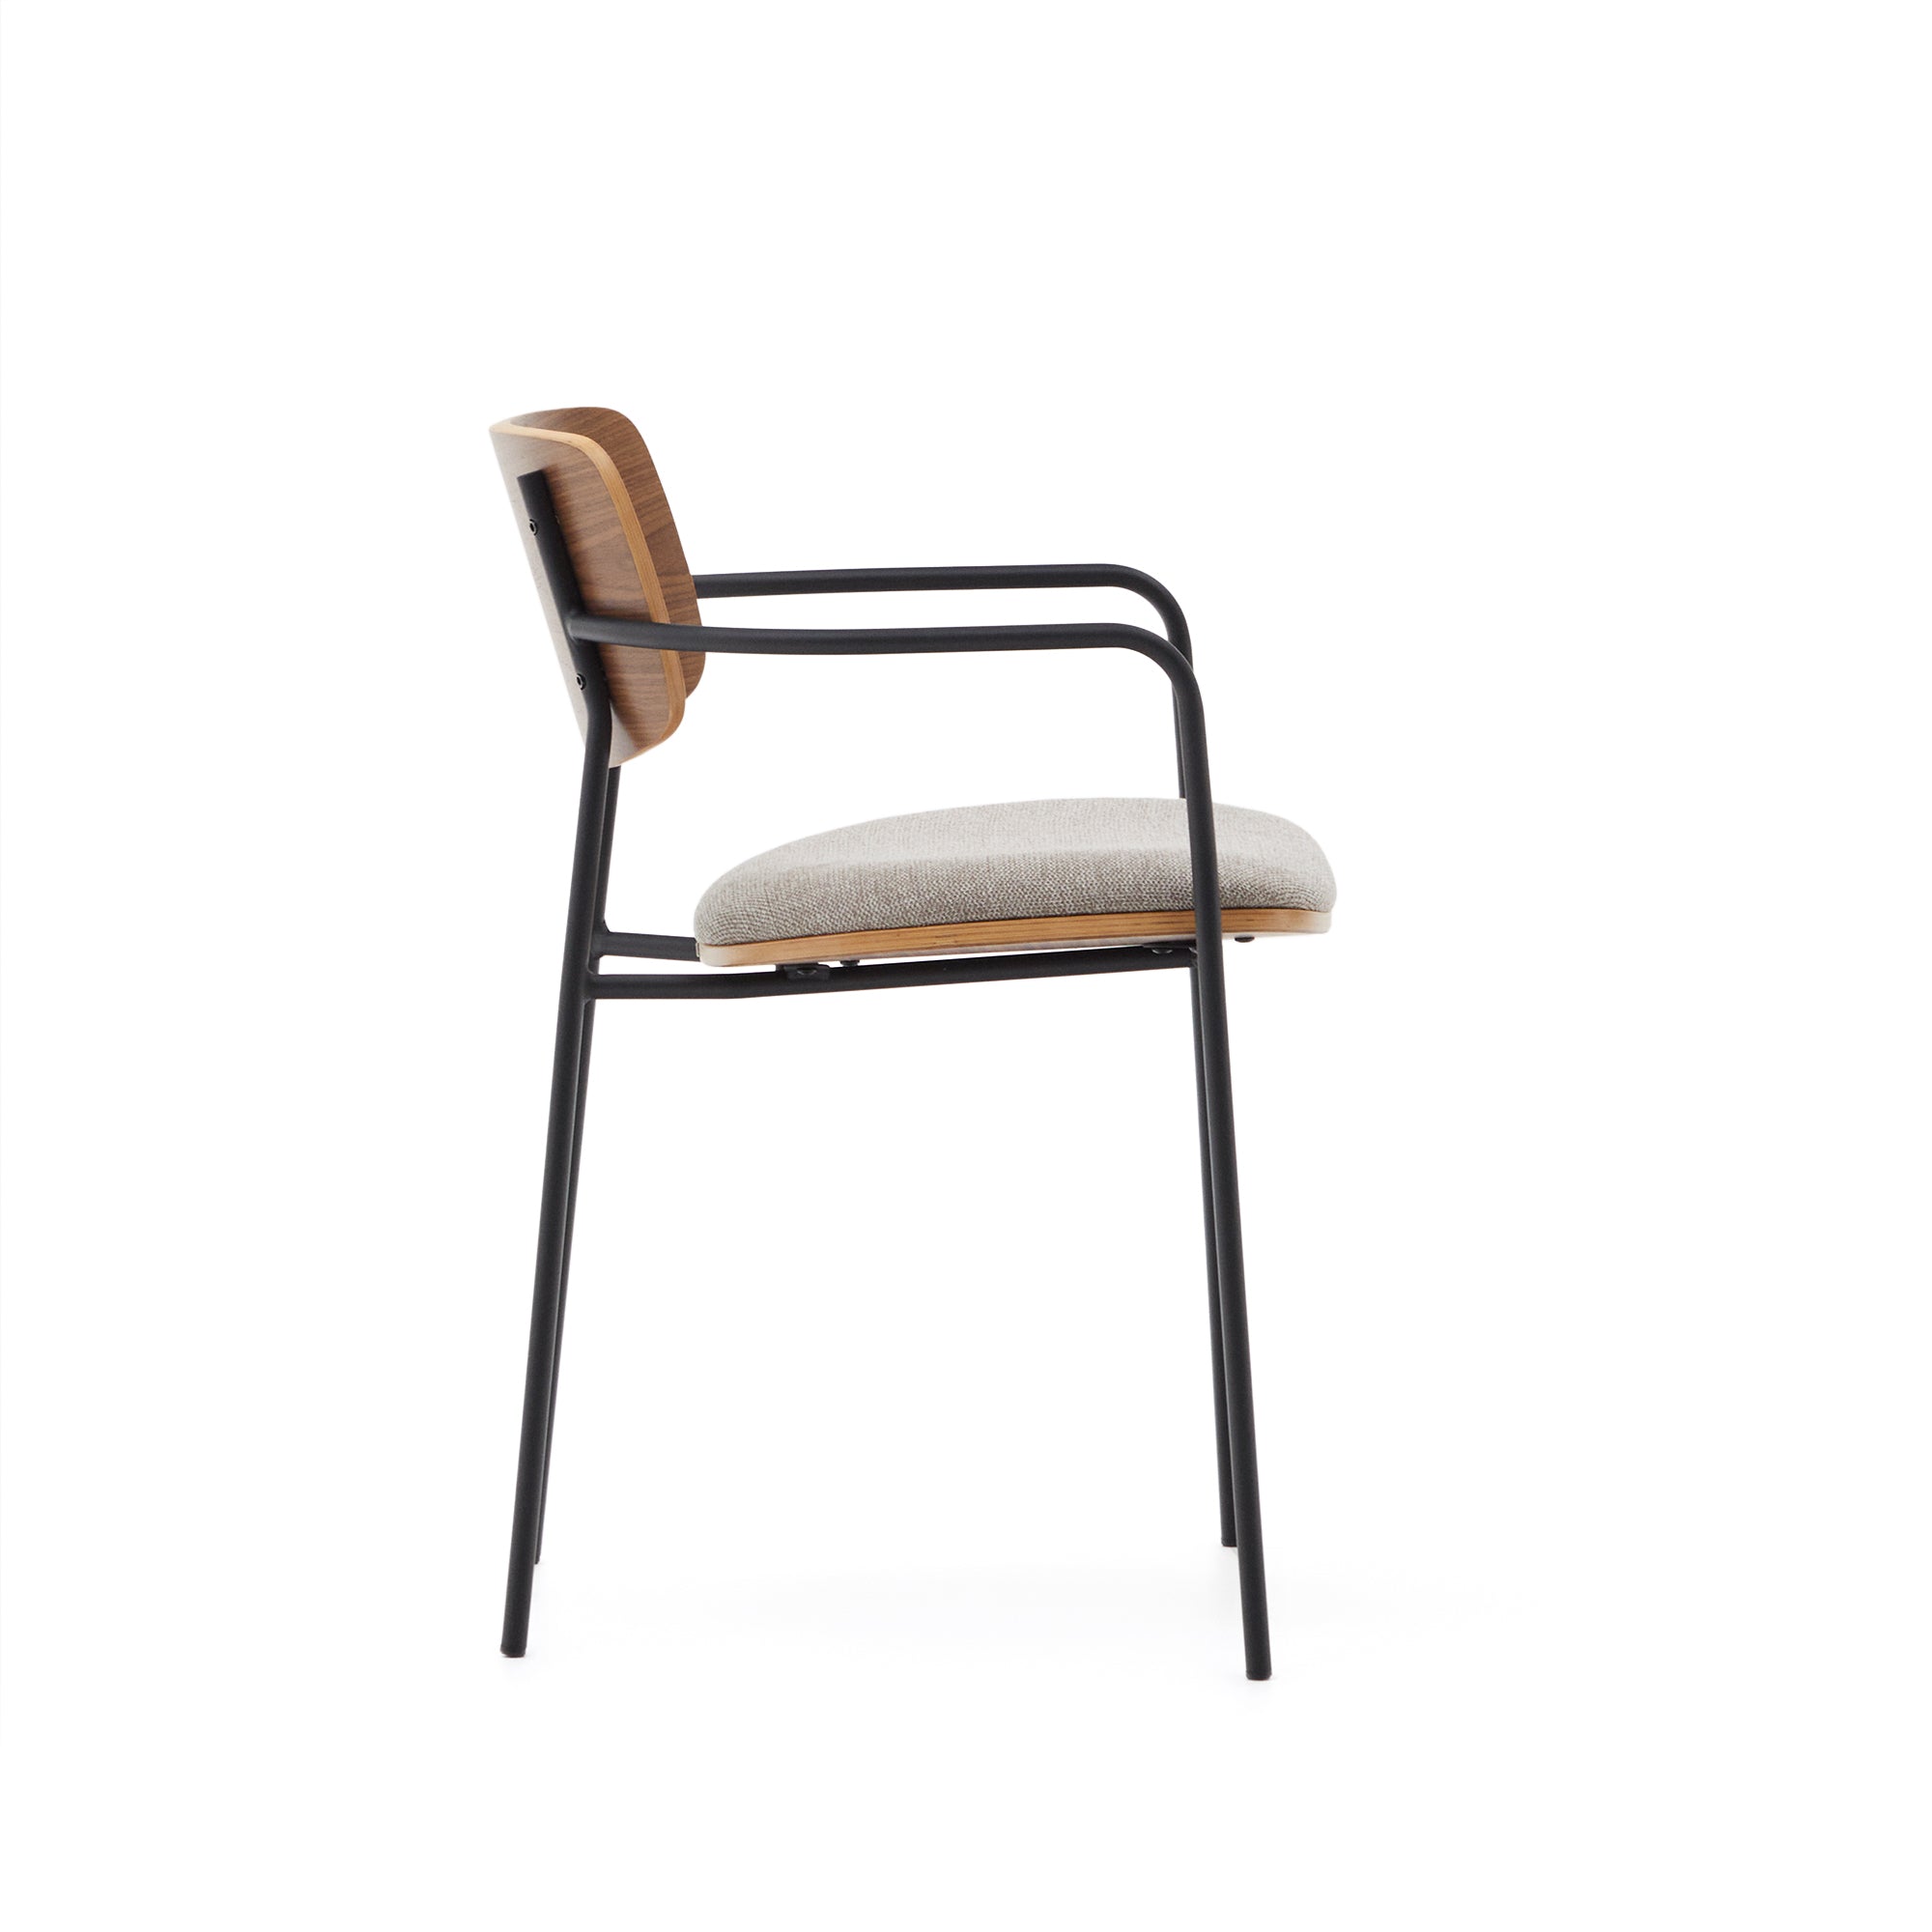 Maureen stackable chair with walnut veneer in natural finish and metal in black finish